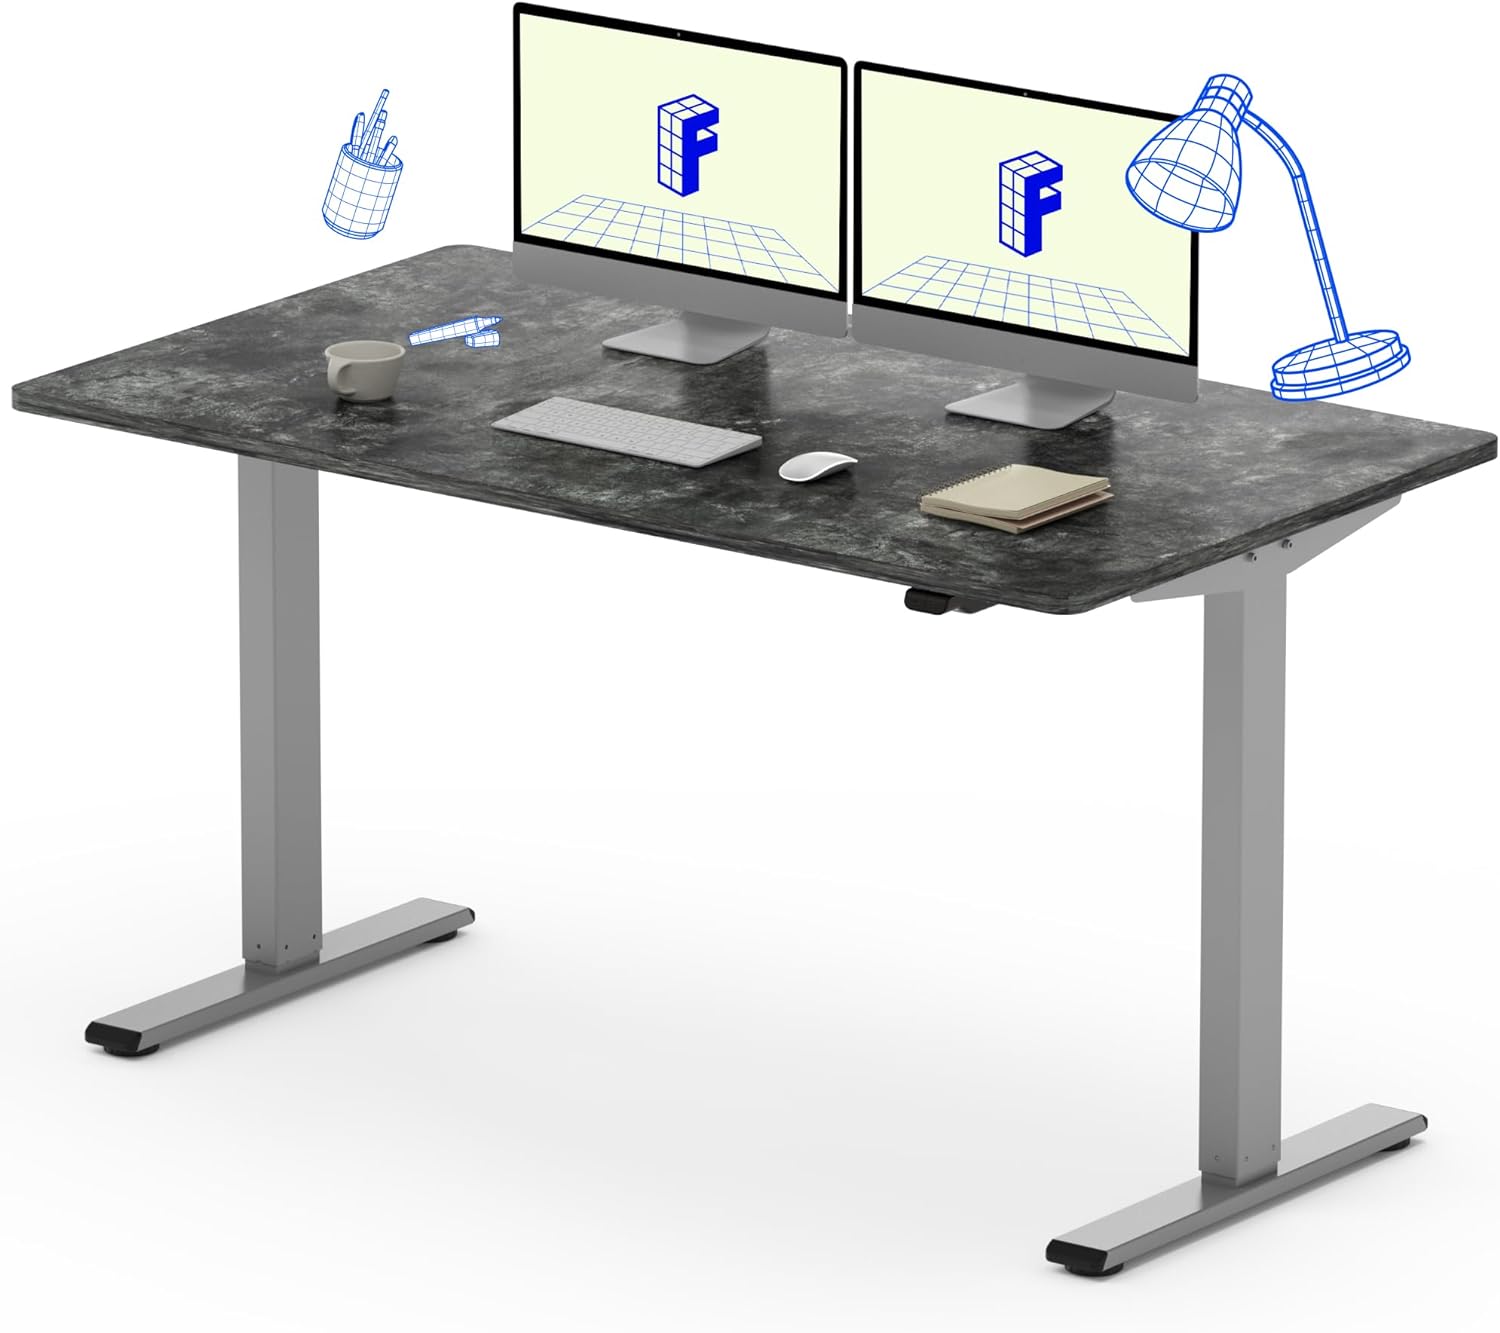 FlexiSpot EC1 Electric Adjustable Height Standing Desk (Gray Frame + Graphite): 55" x 28" $168, 48" x 24" $126, 48" x 30" $147 + Free Shipping